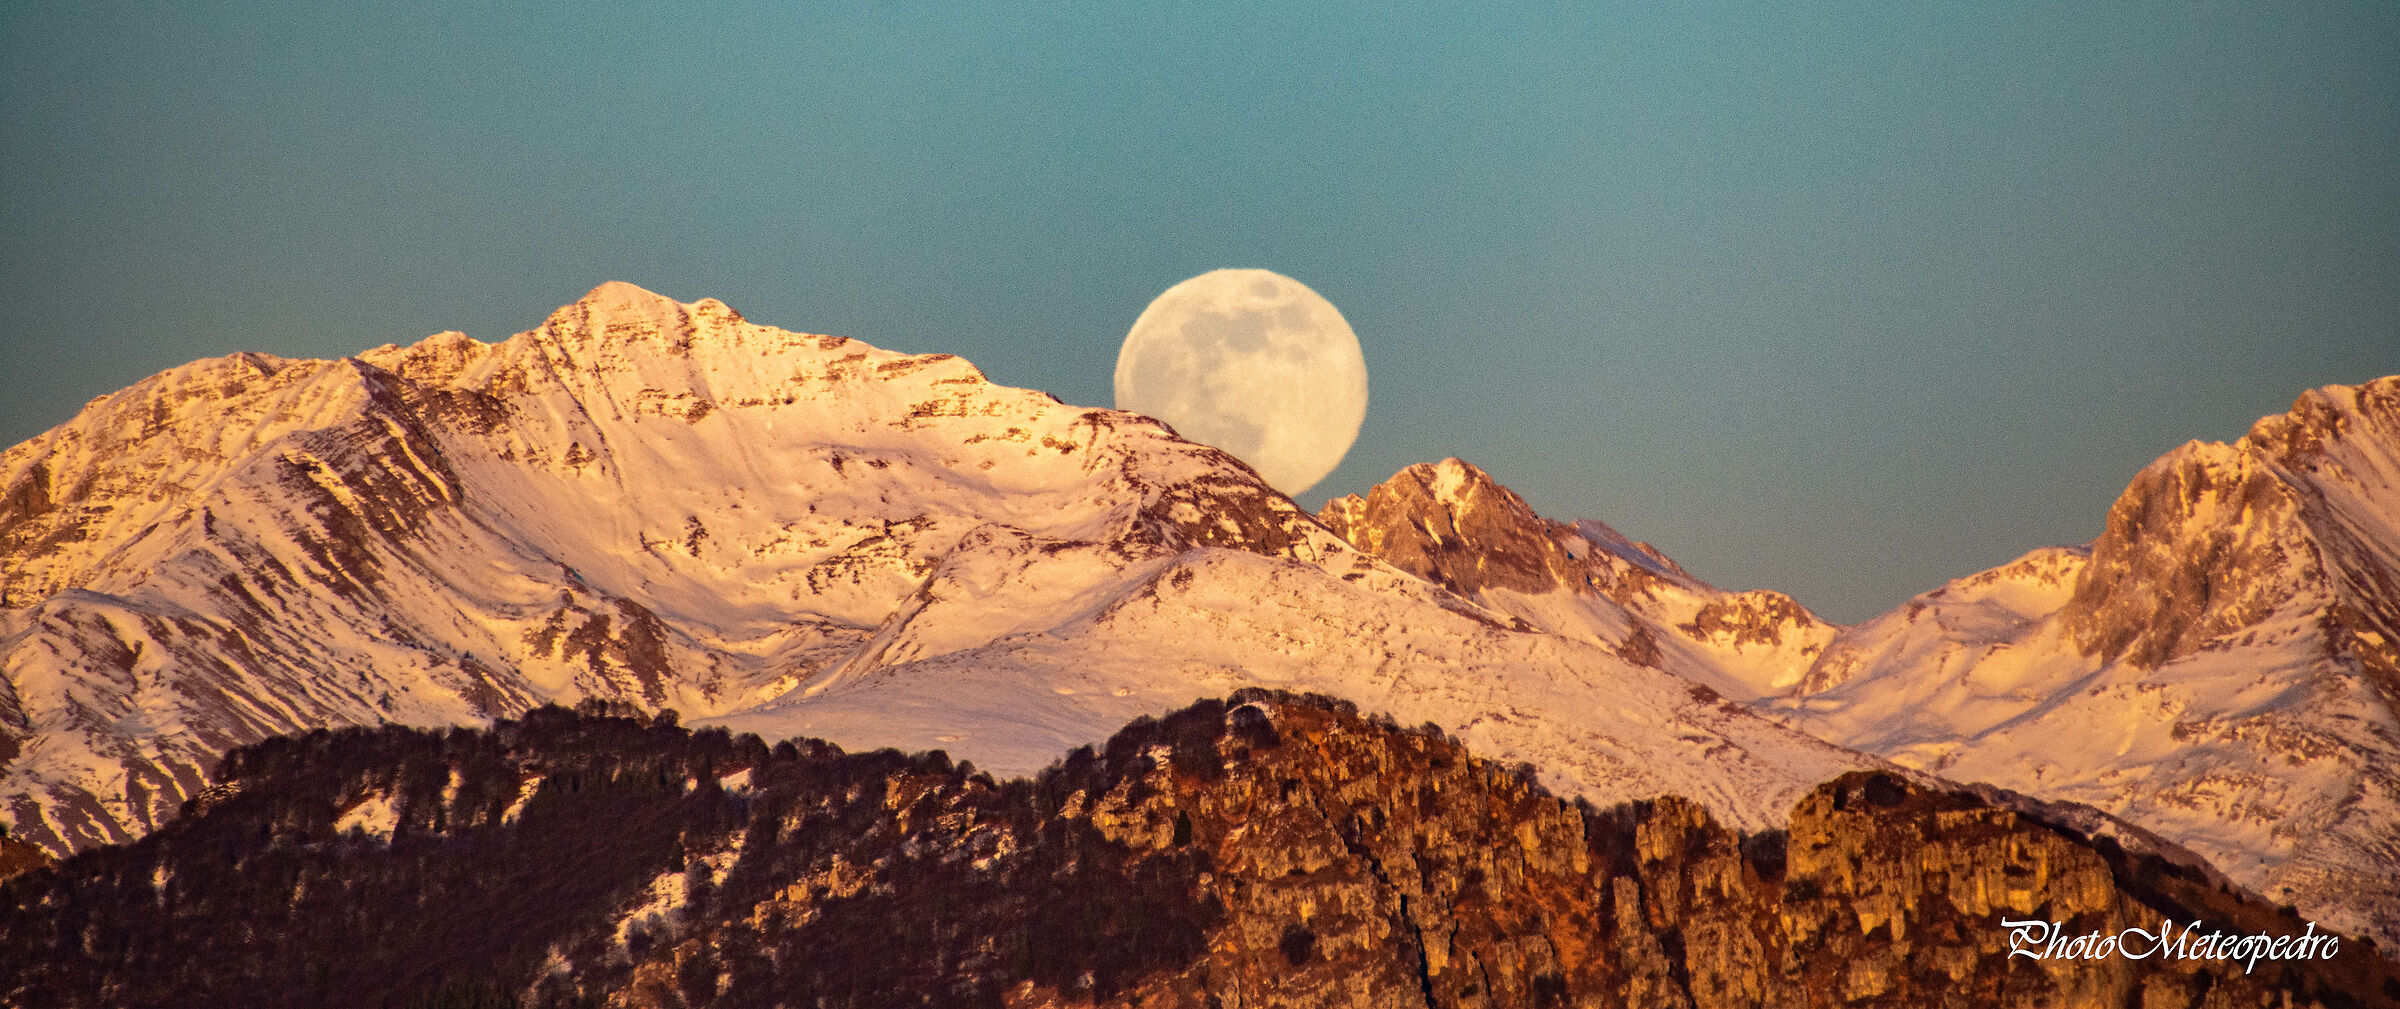 The moon rises from the mountain.........